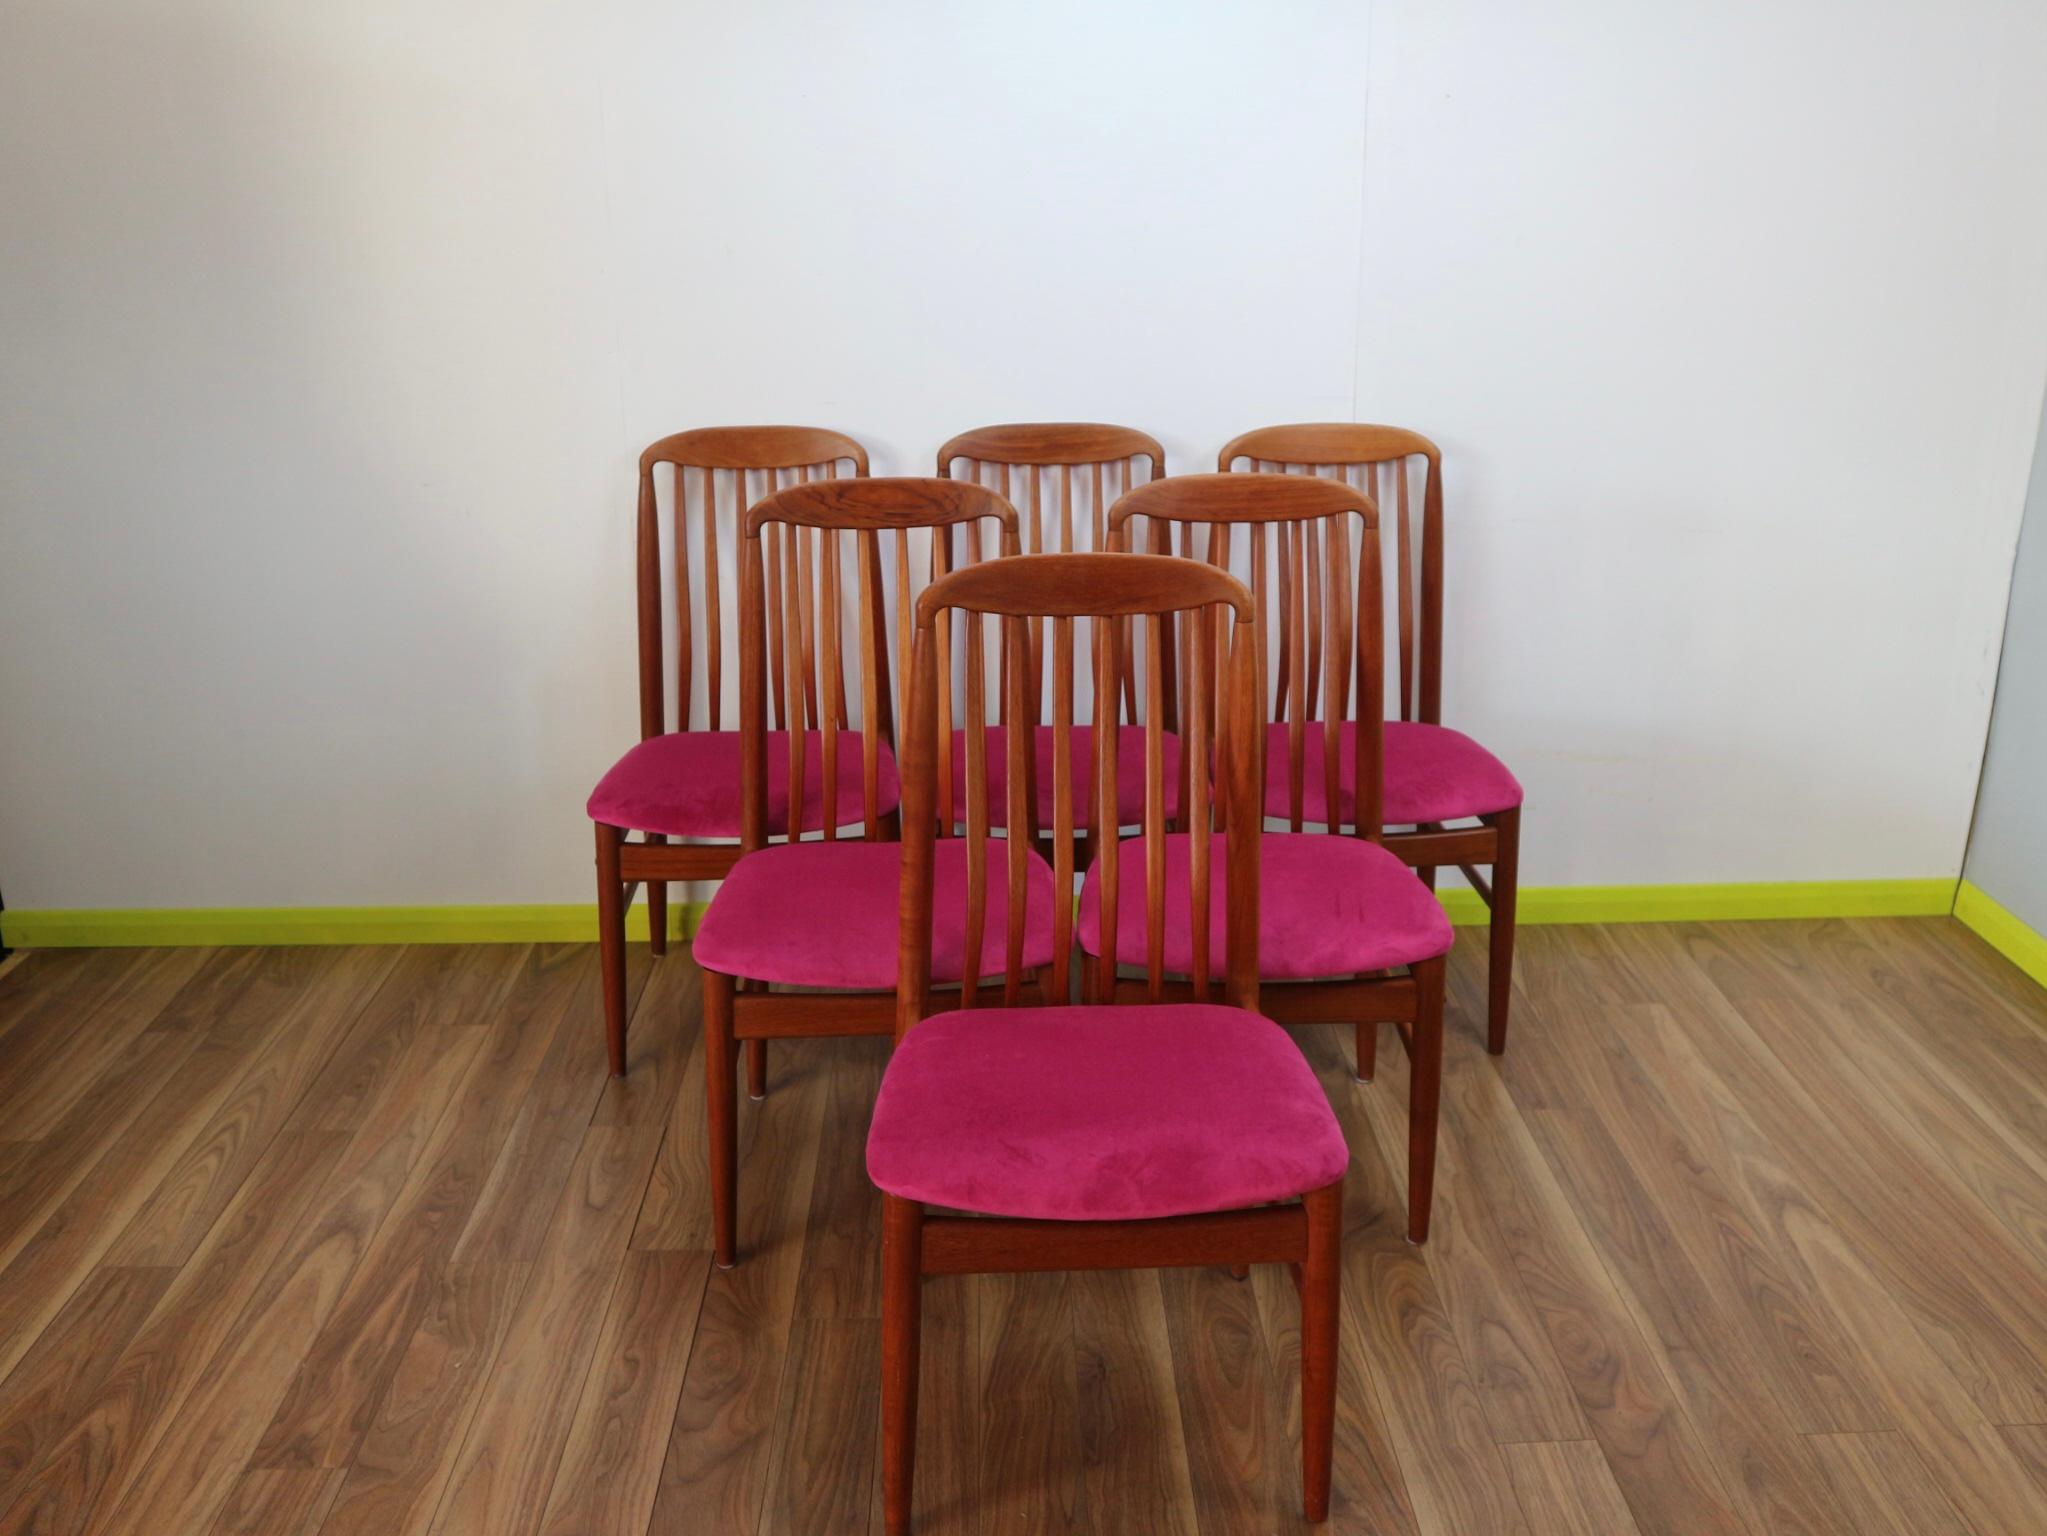 A gorgeous set of Danish design dining chairs made by Benni Linden. These chairs have fantastic lines and the back supports look amazing. The seat pads have recently ben reupholstered in vivid pink and really set the chairs off.